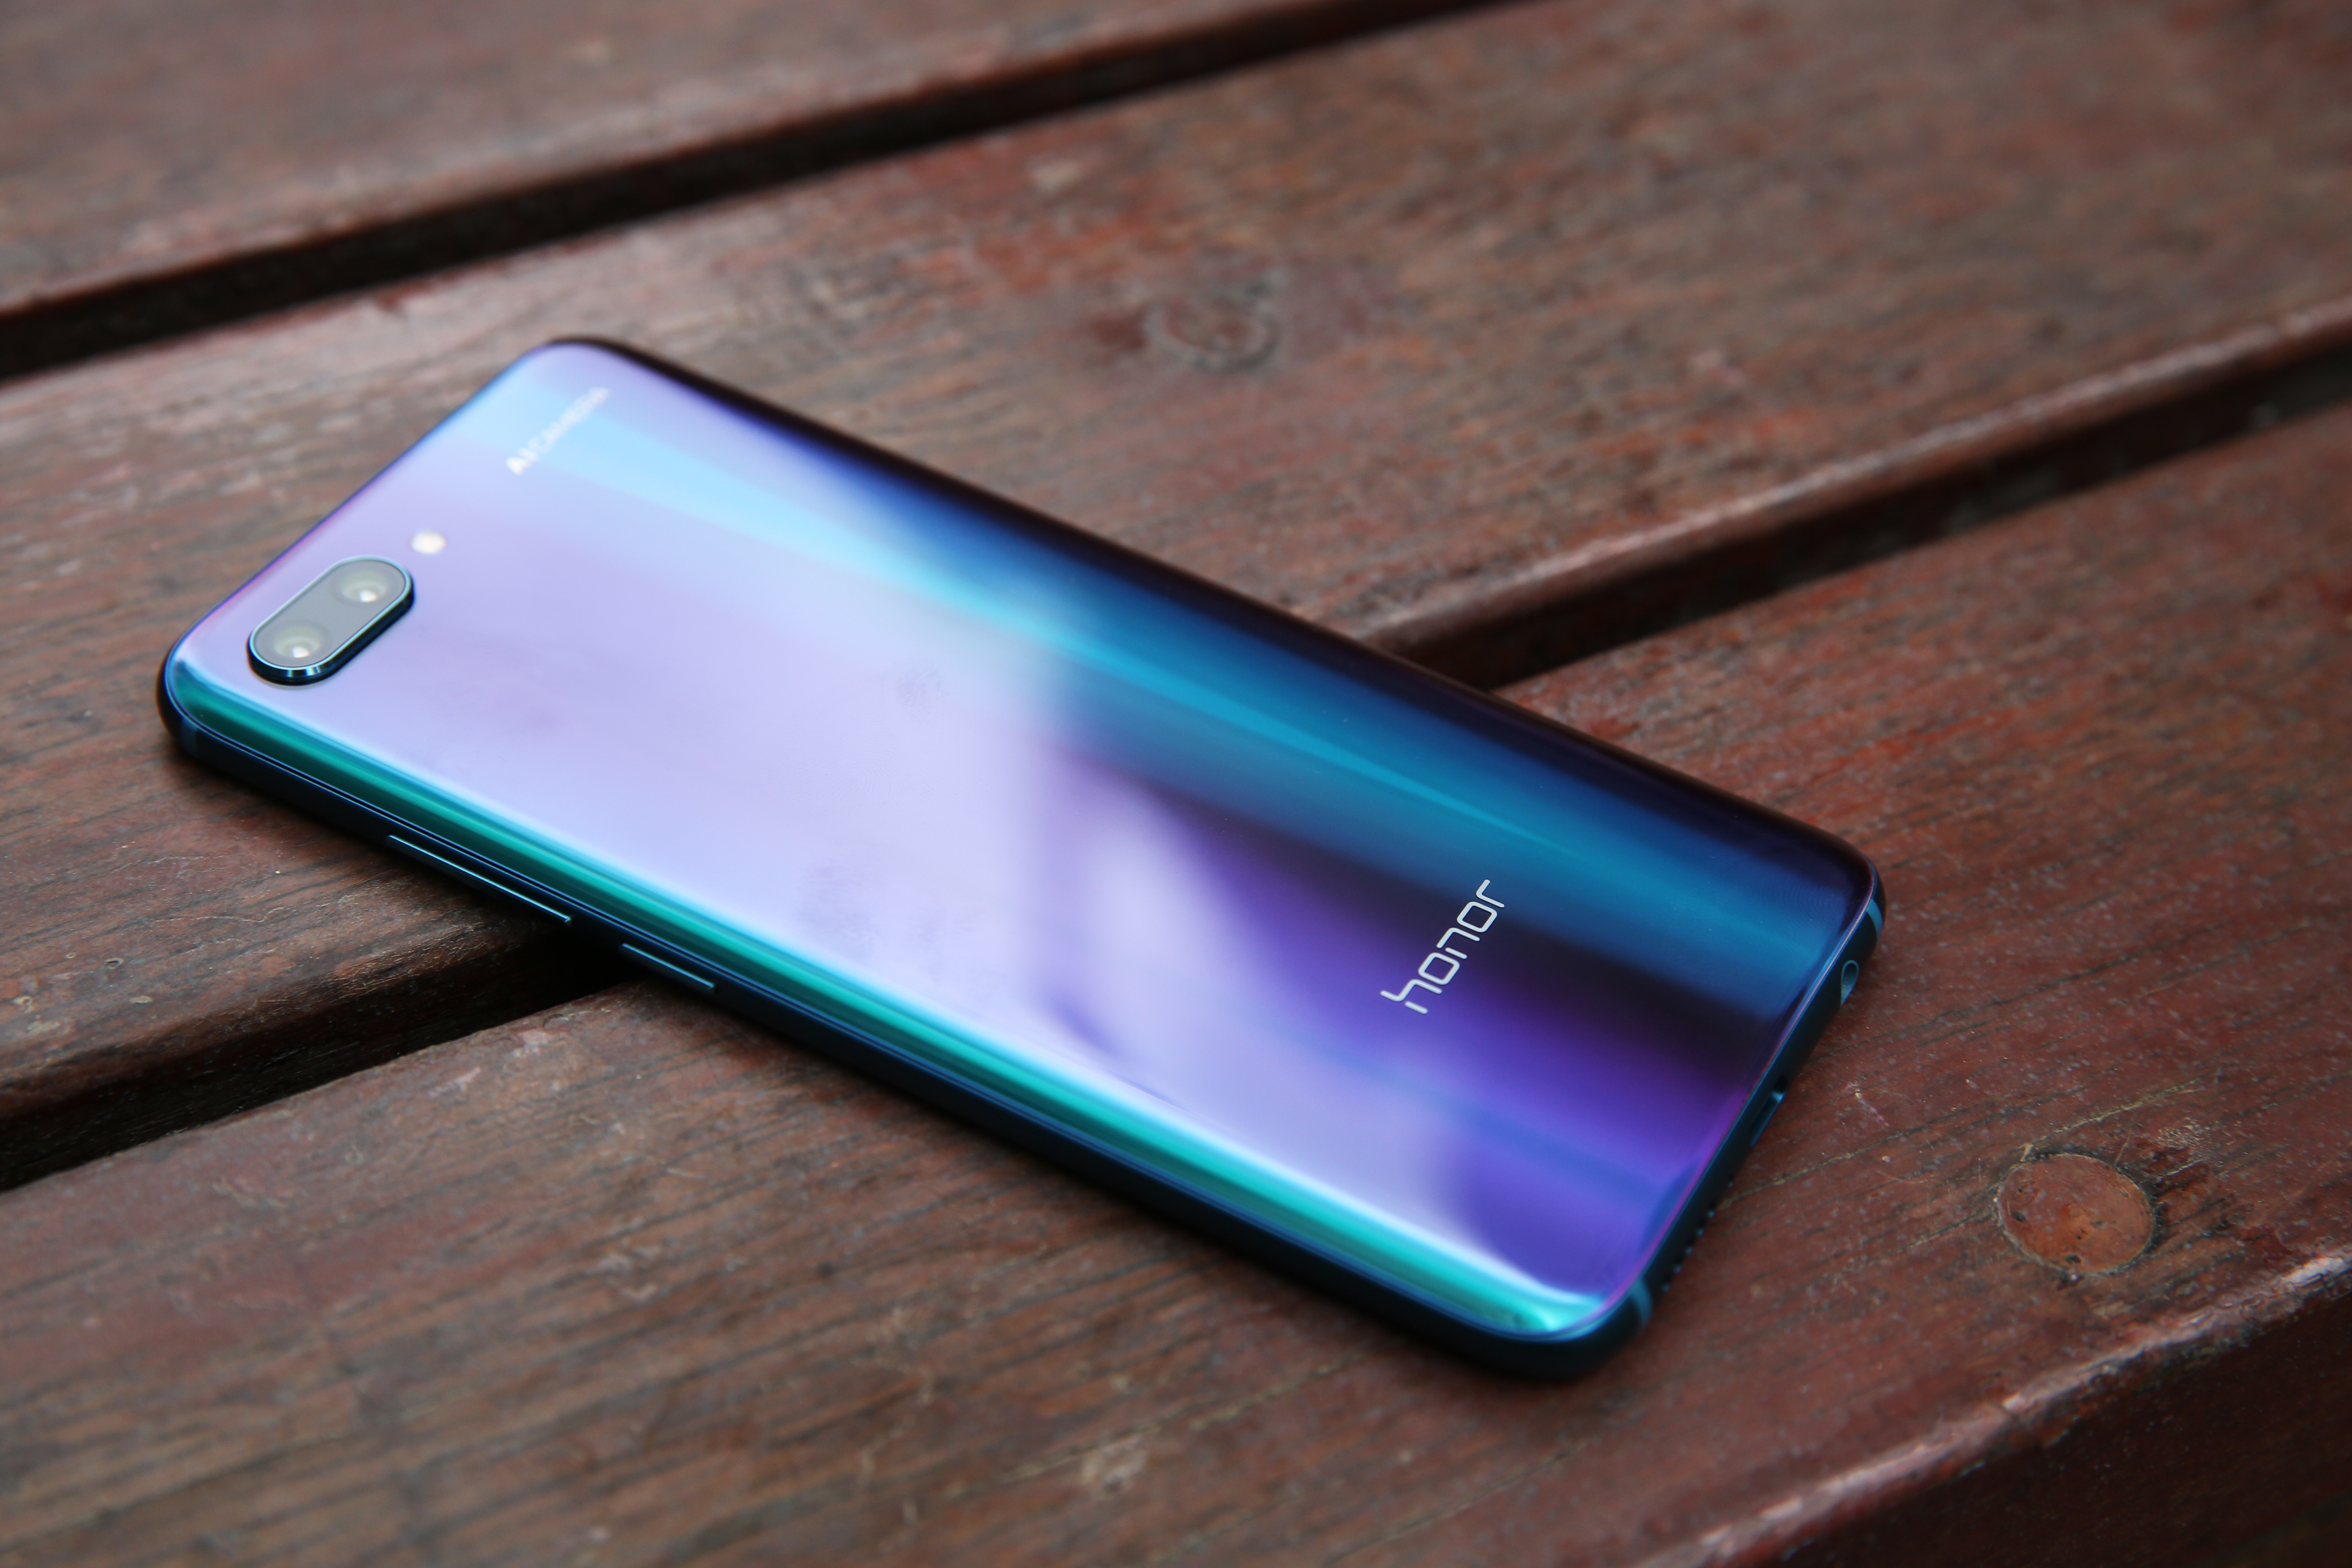 The New Honor 10 Smartphone – First thoughts